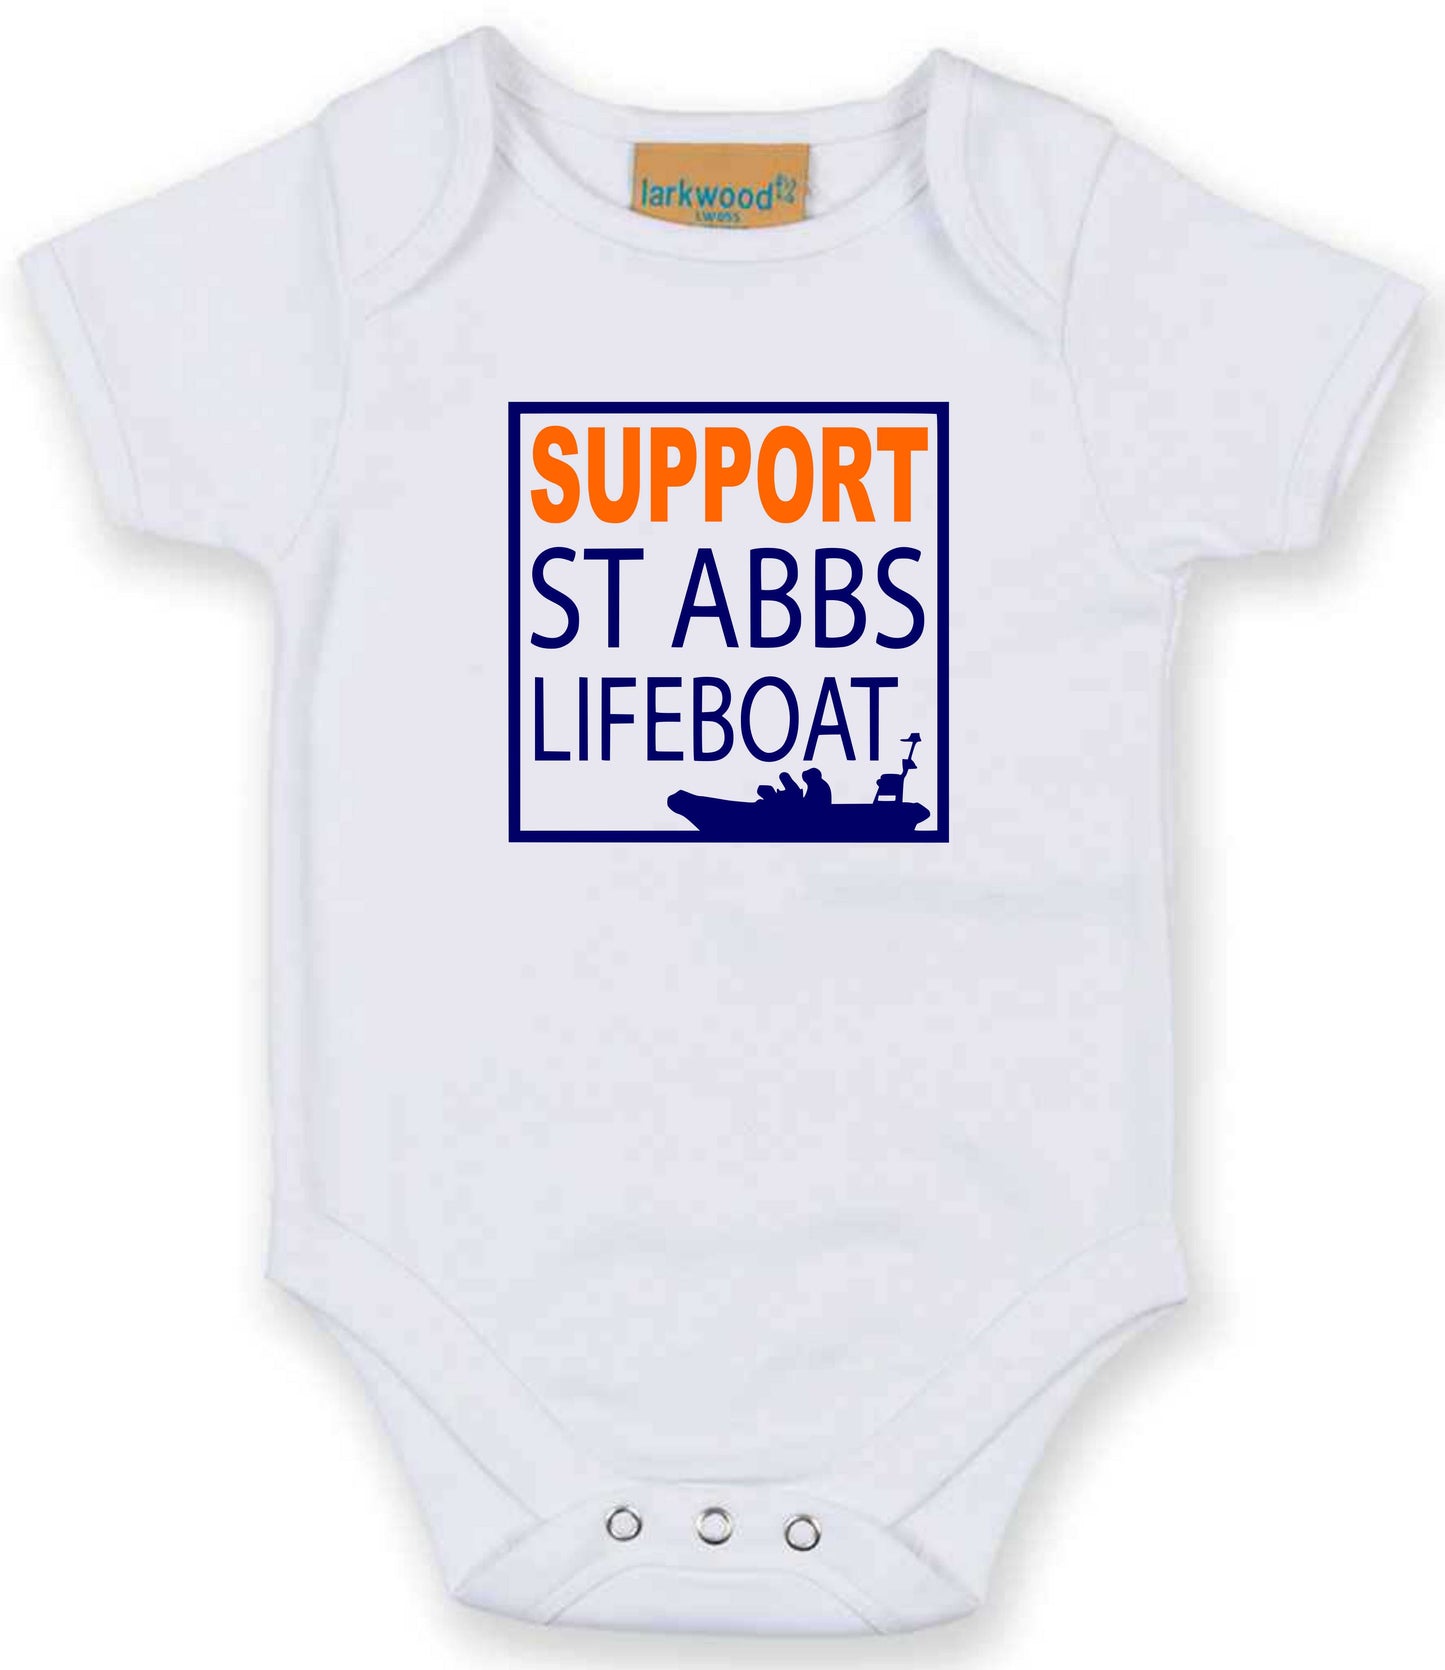 St Abbs Lifeboat Baby Grow